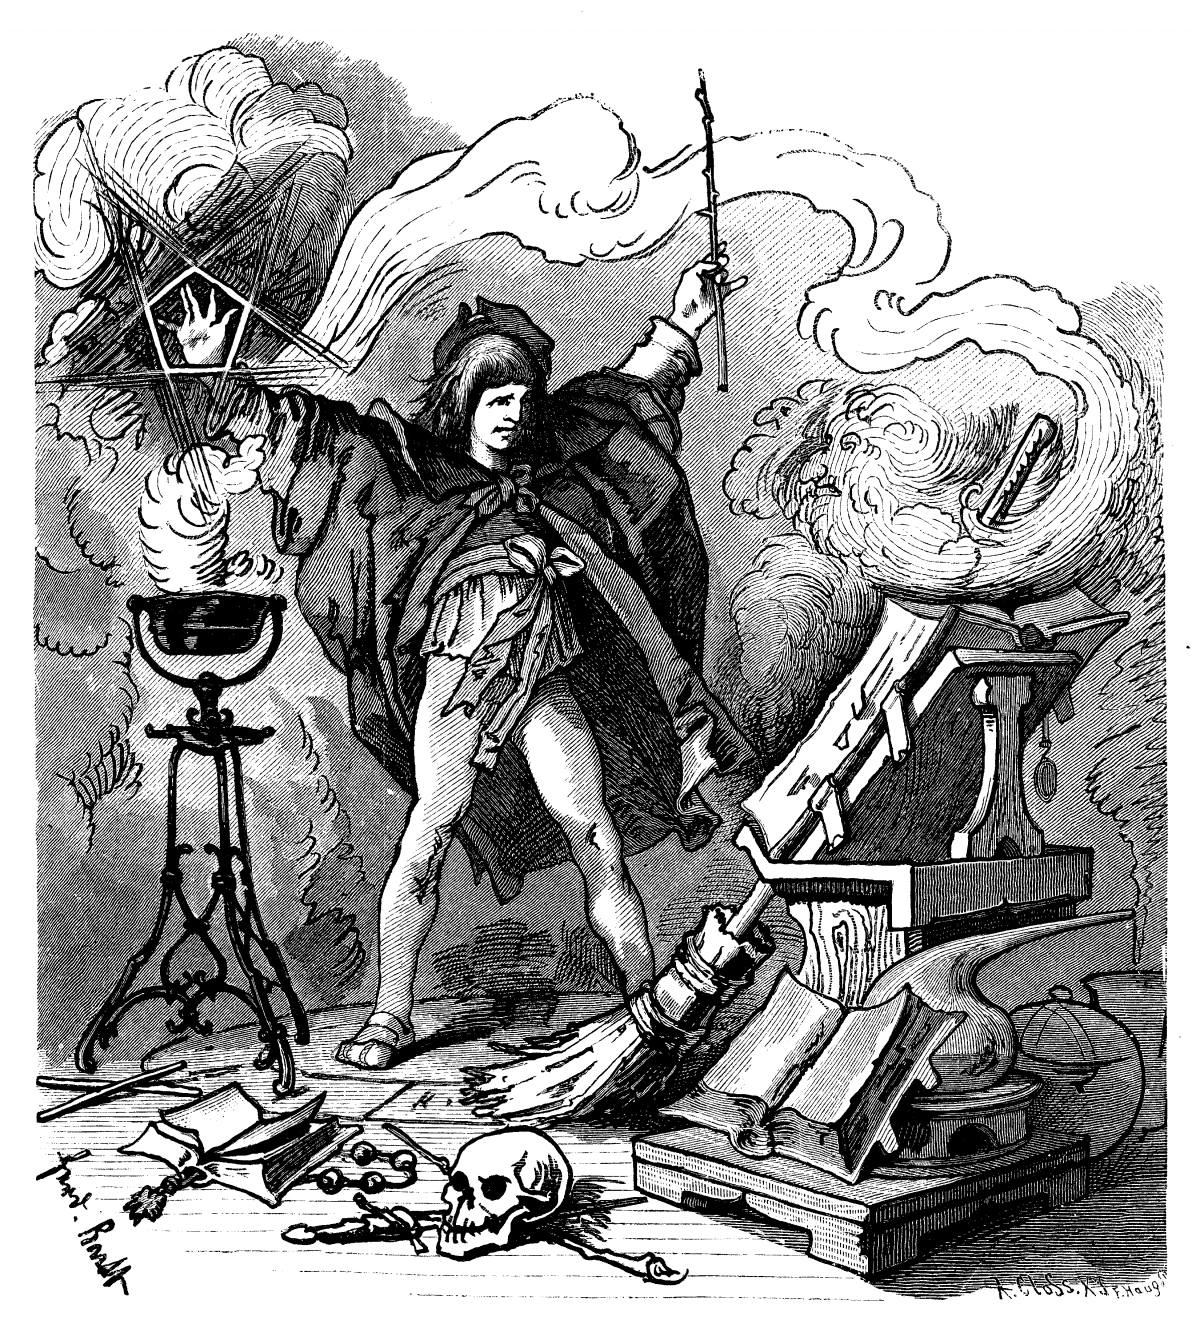 Illustration for Johann Wolfgang von Goethe’s poem “Sorcerer’s Apprentice,” circa 1882, by Ferdinand Barth. Goethe’s work shows disaster unleashed by the ignorance of the conjurer. (Public domain)